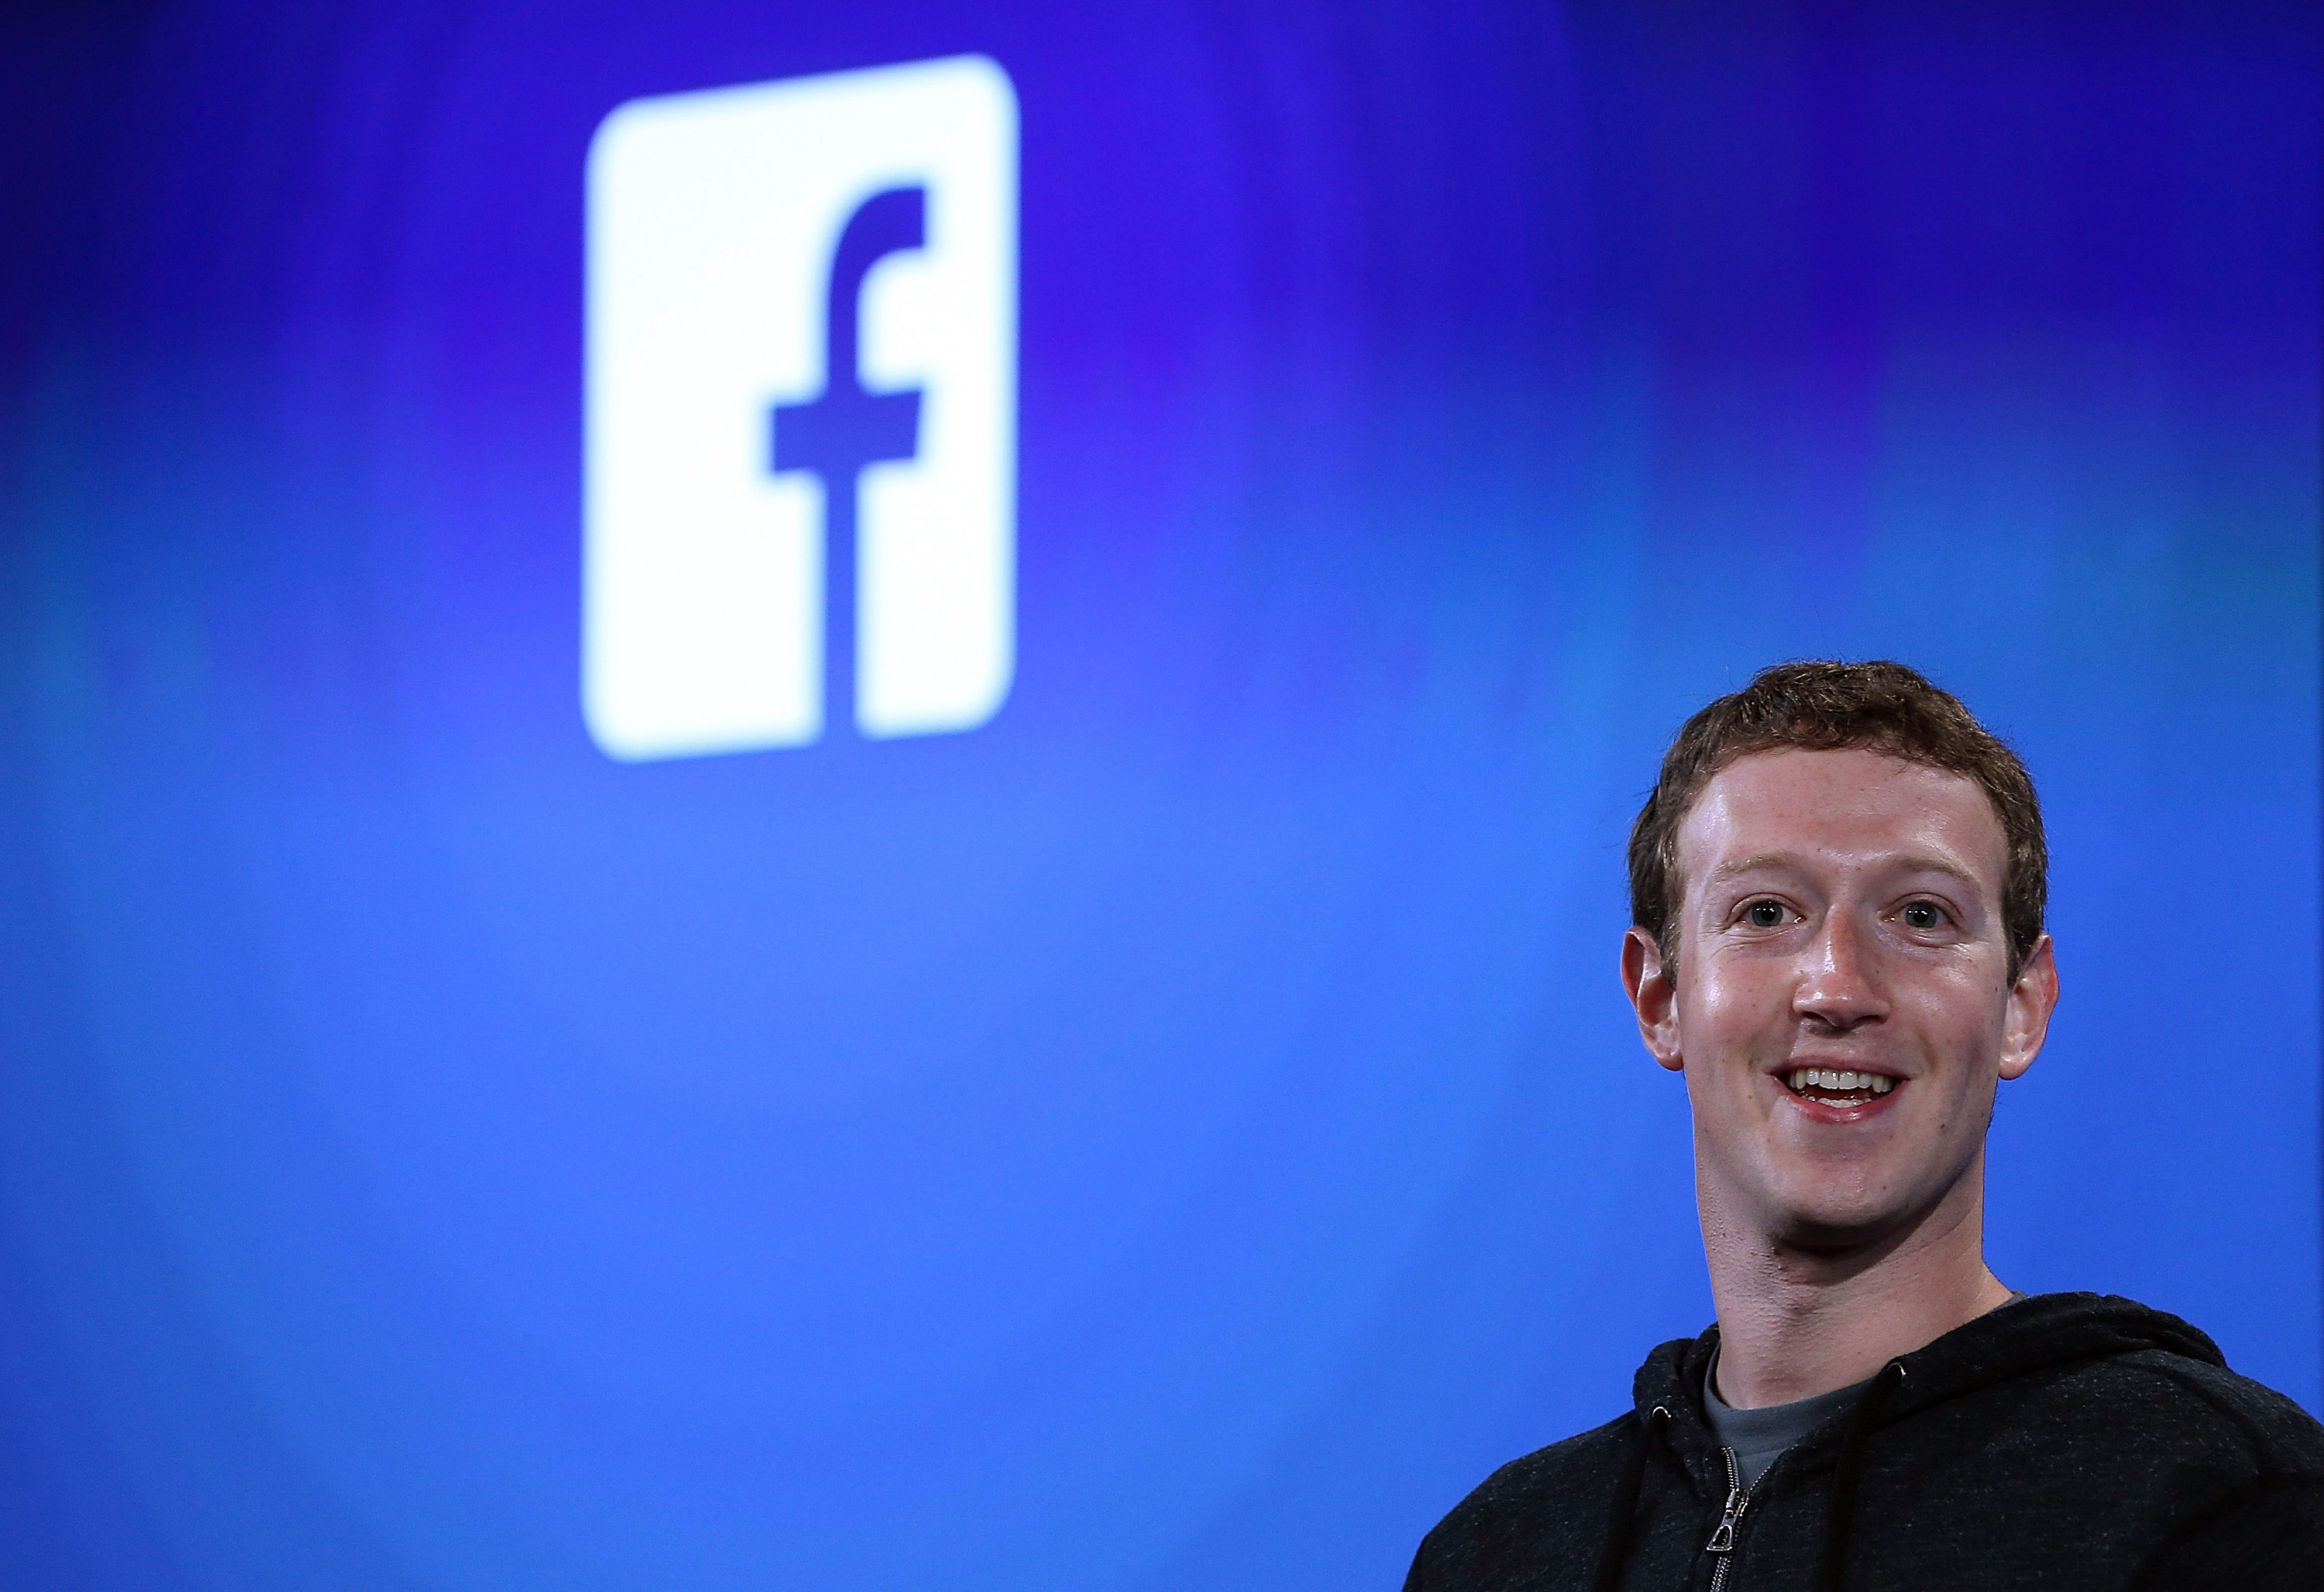 Facebook CEO Mark Zuckerberg speaks during an event at Facebook headquarters on April 4, 2013 in Menlo Park, California. (Justin Sullivan/Getty Images)